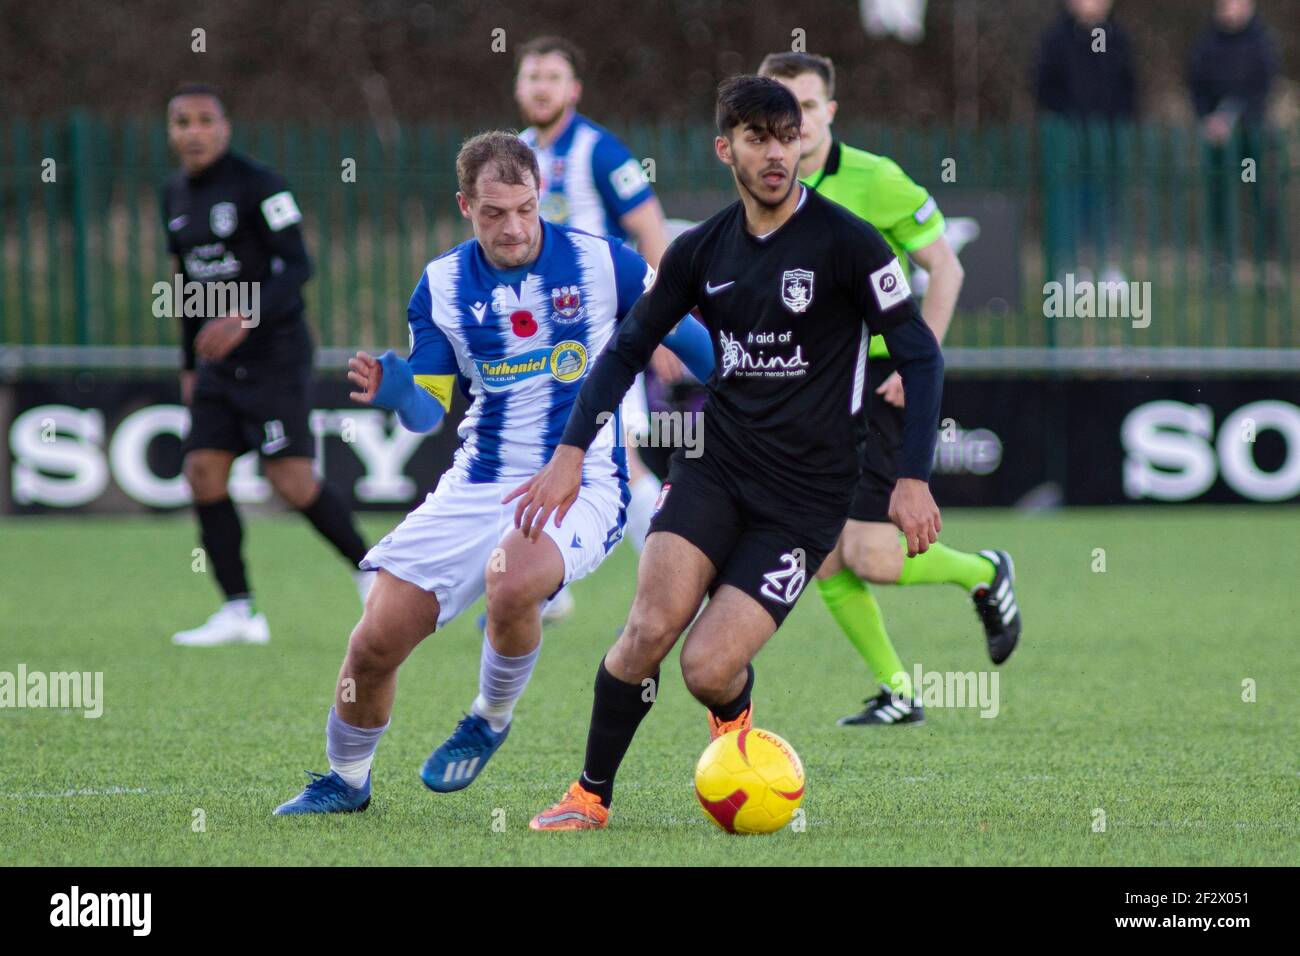 Sameron Singh-Dool of Connahs Quay in action  Penybont v Connahs Quay at Bryntirion Park in the JD Cymru Premier on the 13th March 2021.Lewis Mitchell Stock Photo